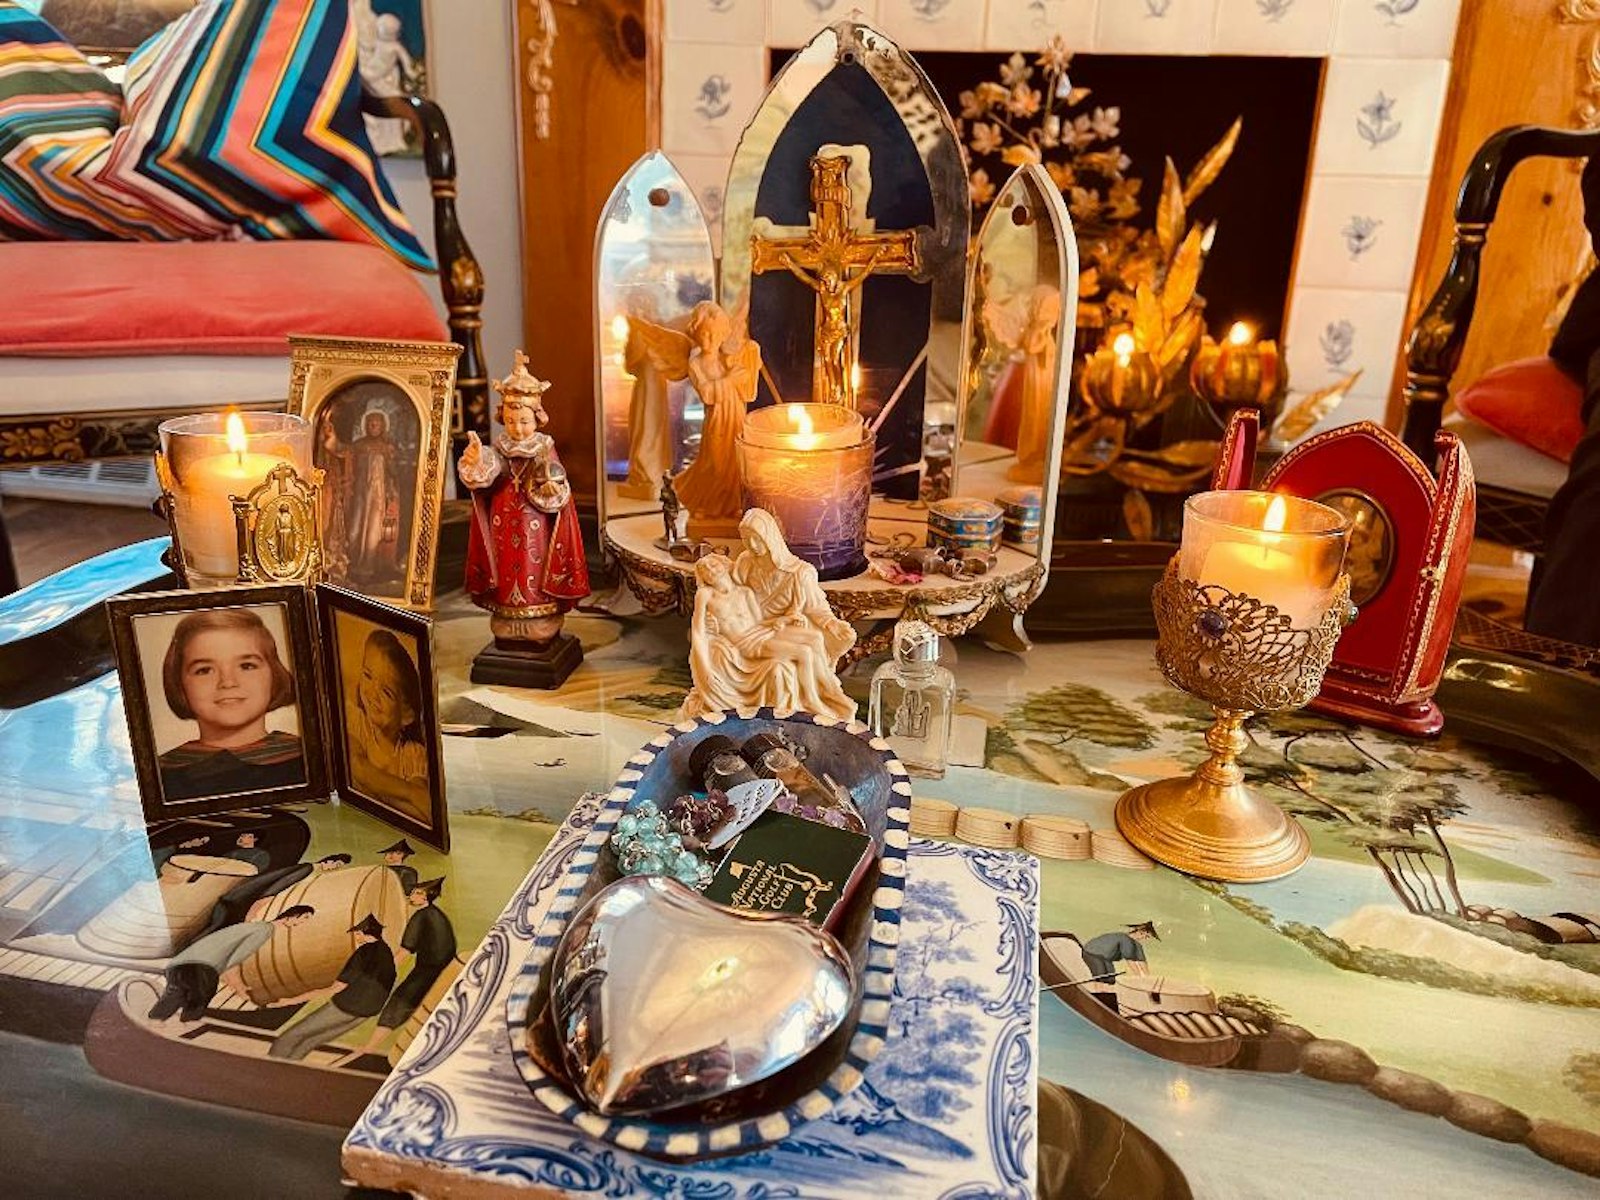 Three candles representing the Father, Son and Holy Spirit stand alight in Kathleen McInerney's home "chapel," where she goes to pray and find inspiration for her work.